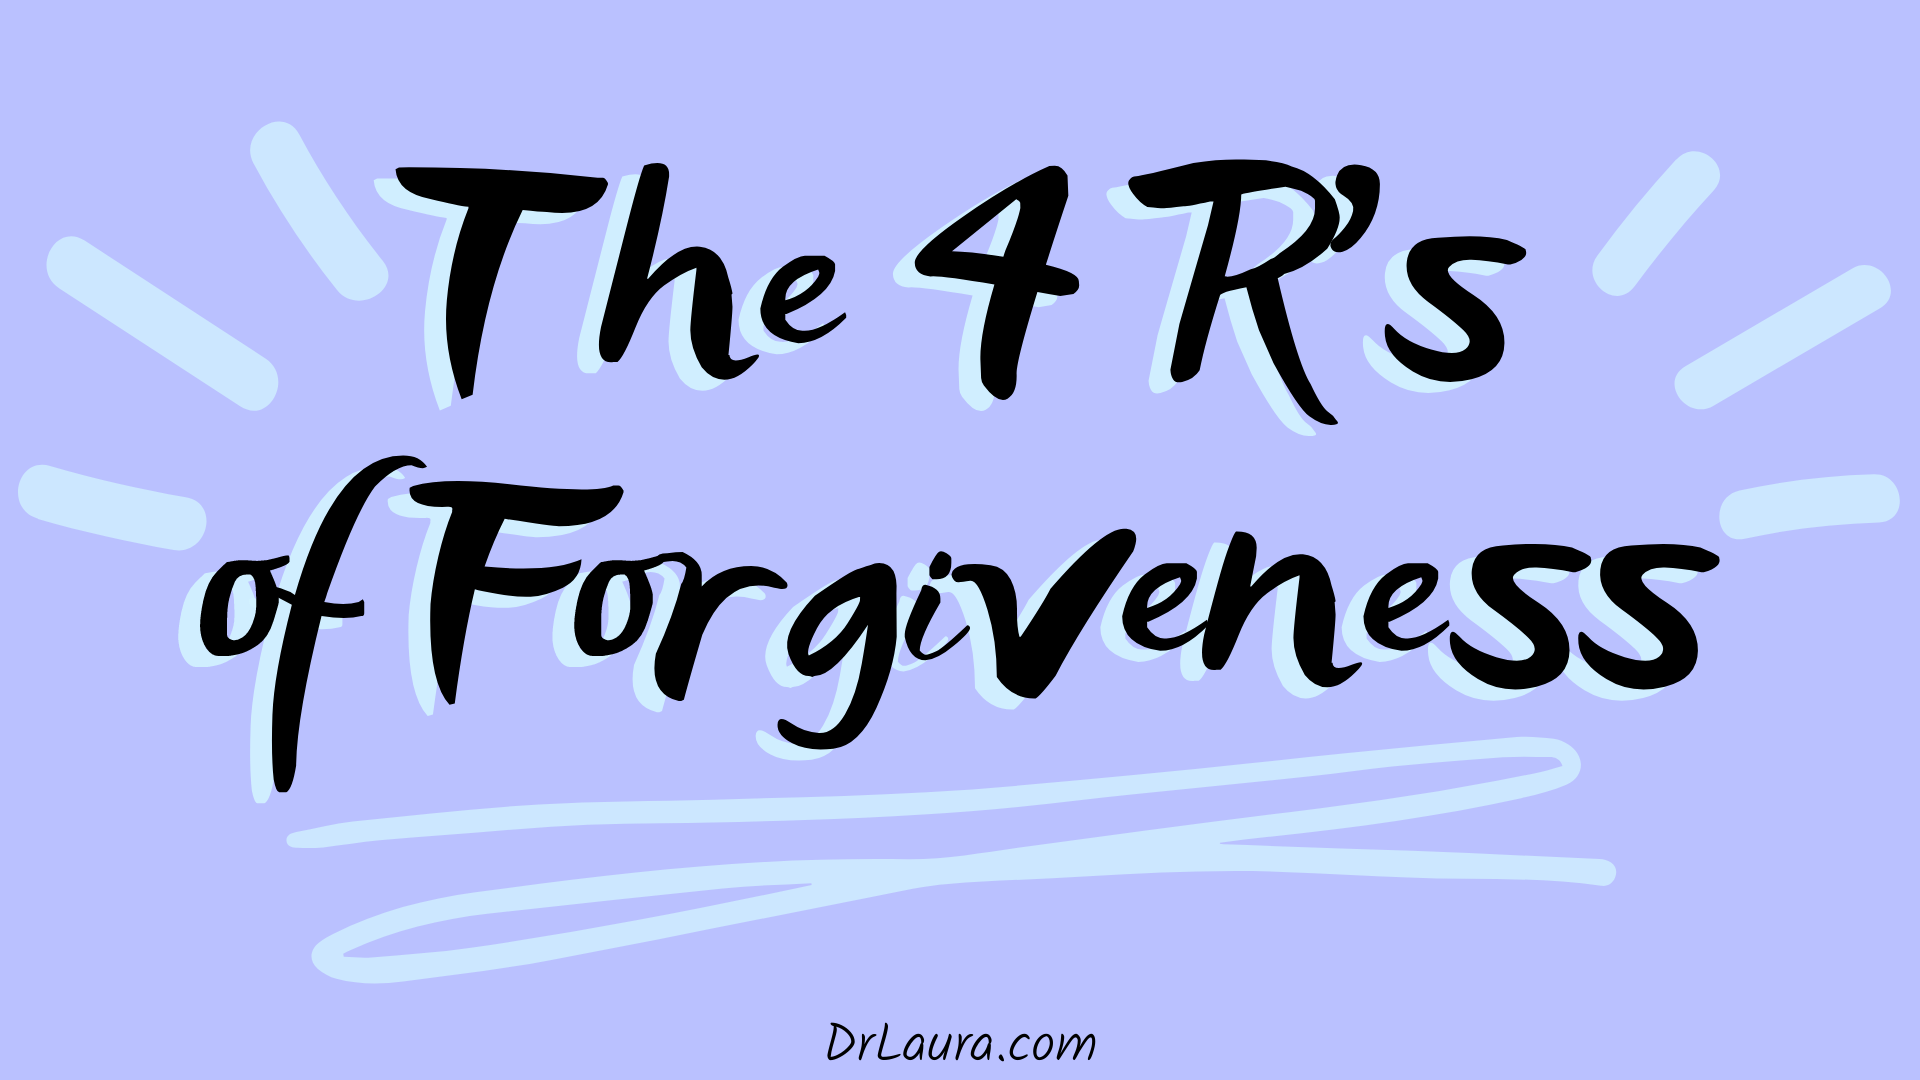 Blog: The 4 R's of Forgiveness